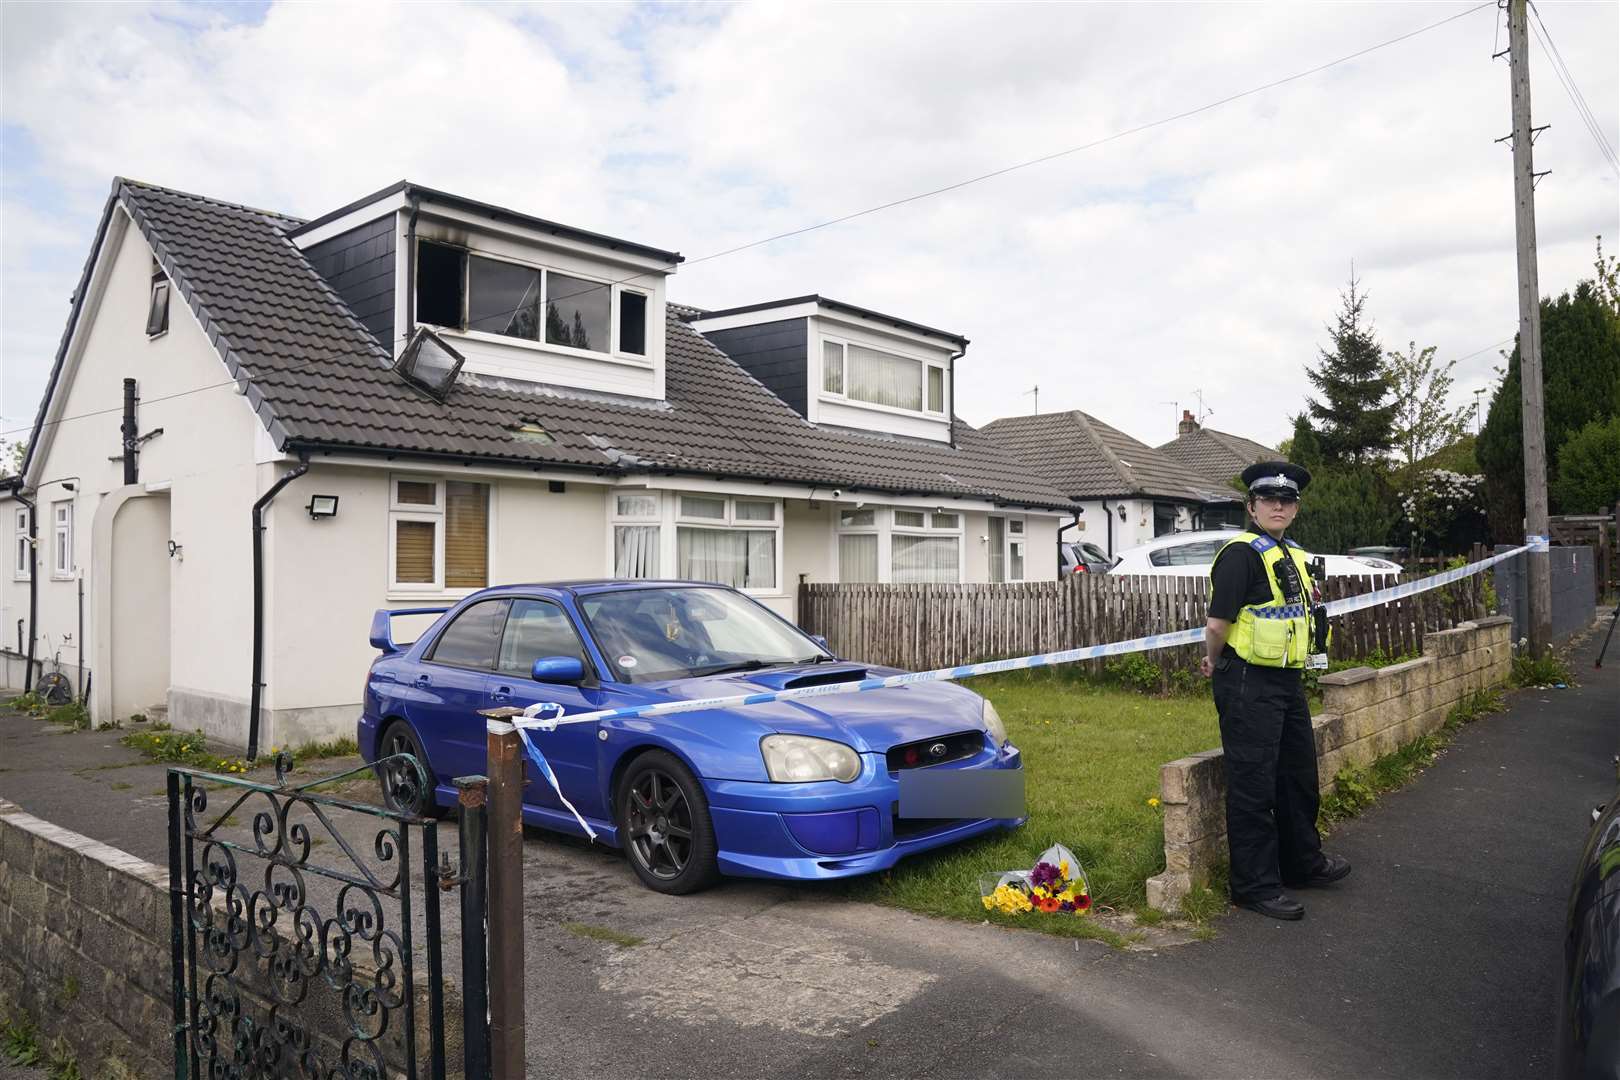 A police officer at the scene of the fatal house fire in Bradford (Danny Lawson/PA)